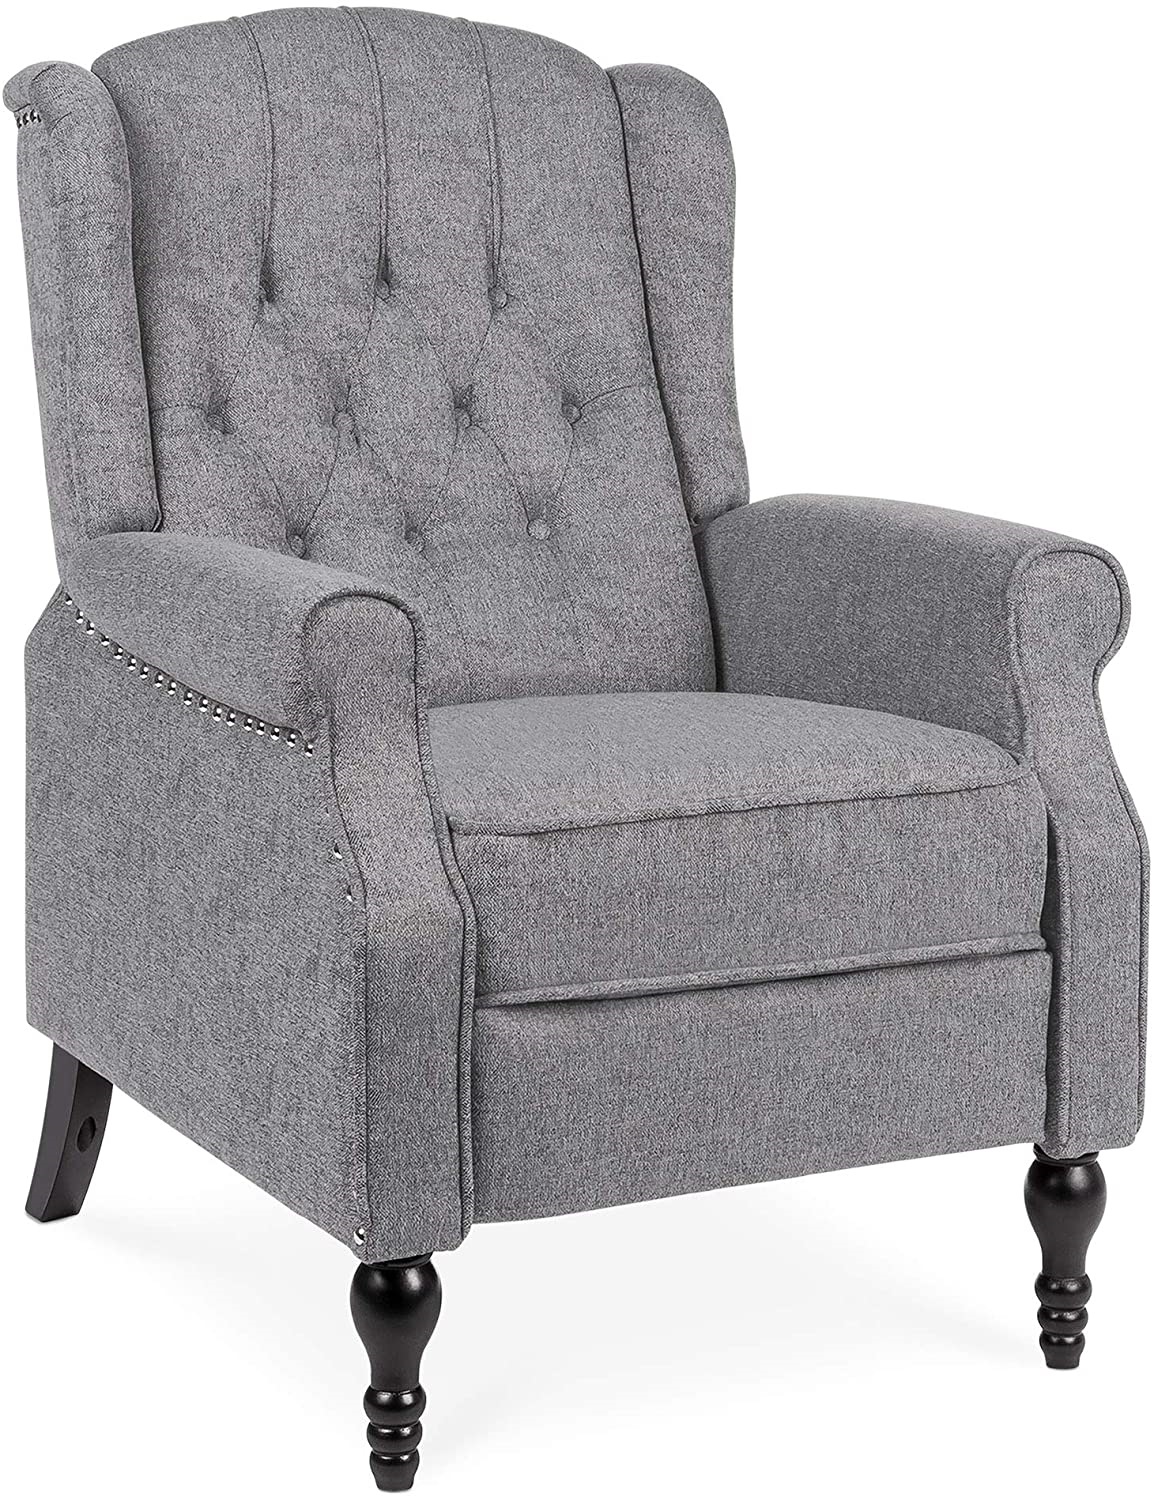 Best Choice Products Tufted Upholstered Wingback Push Back Recliner Armchair for Living Room